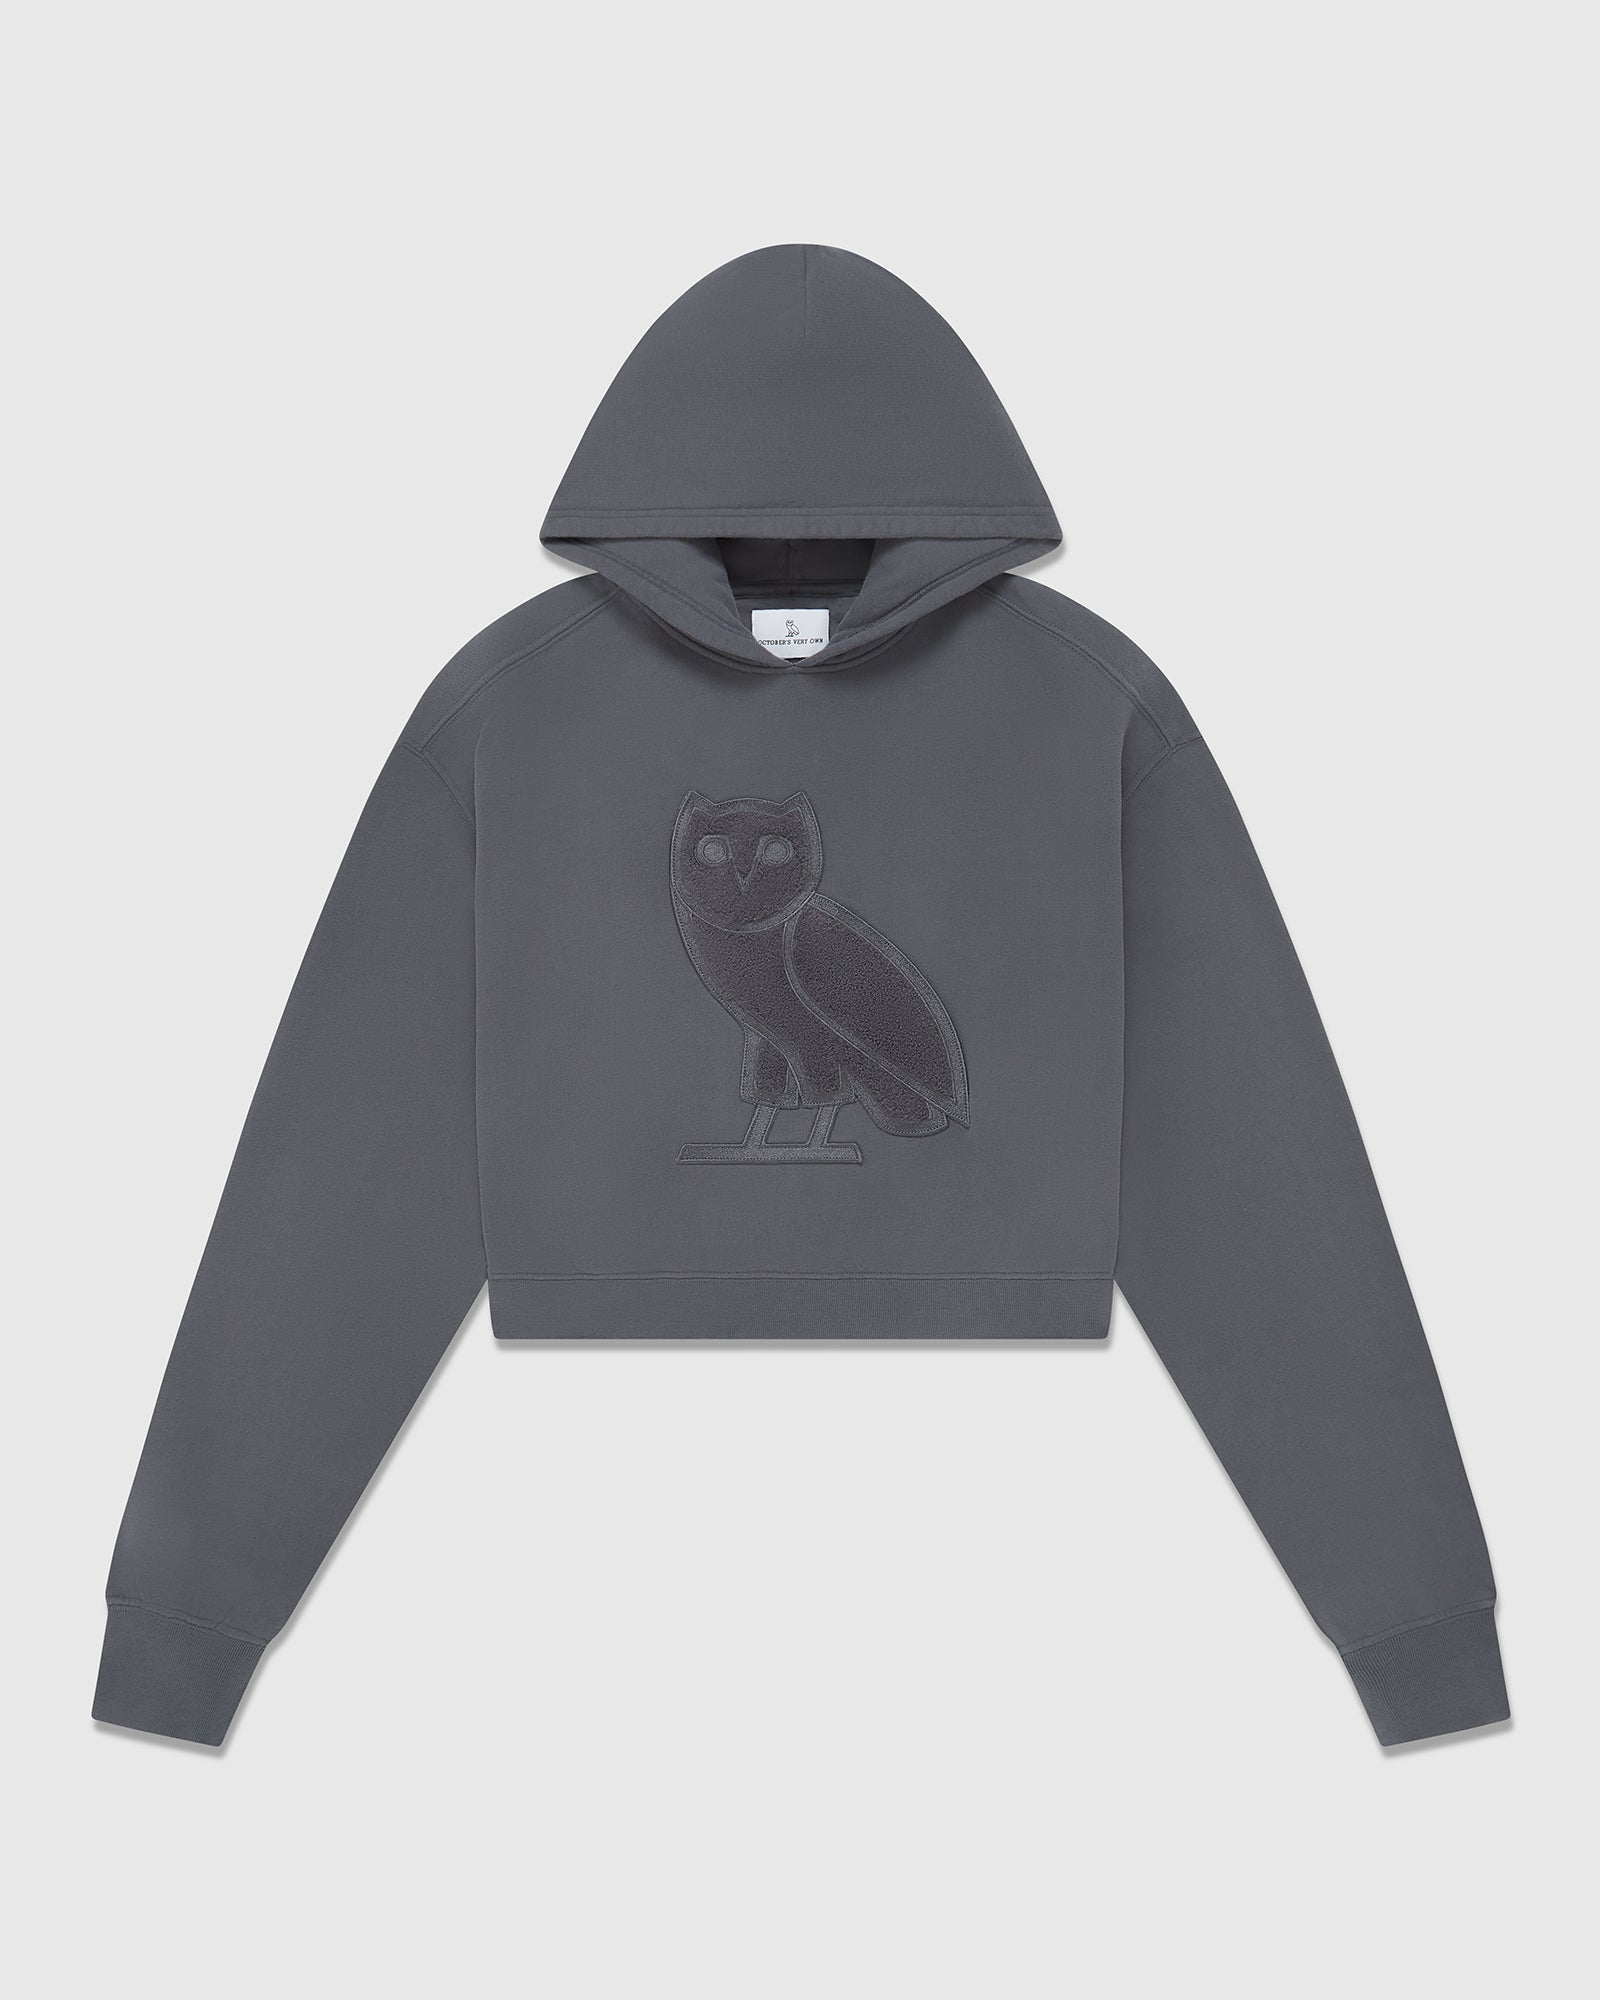 All Day Hoodie - Charcoal